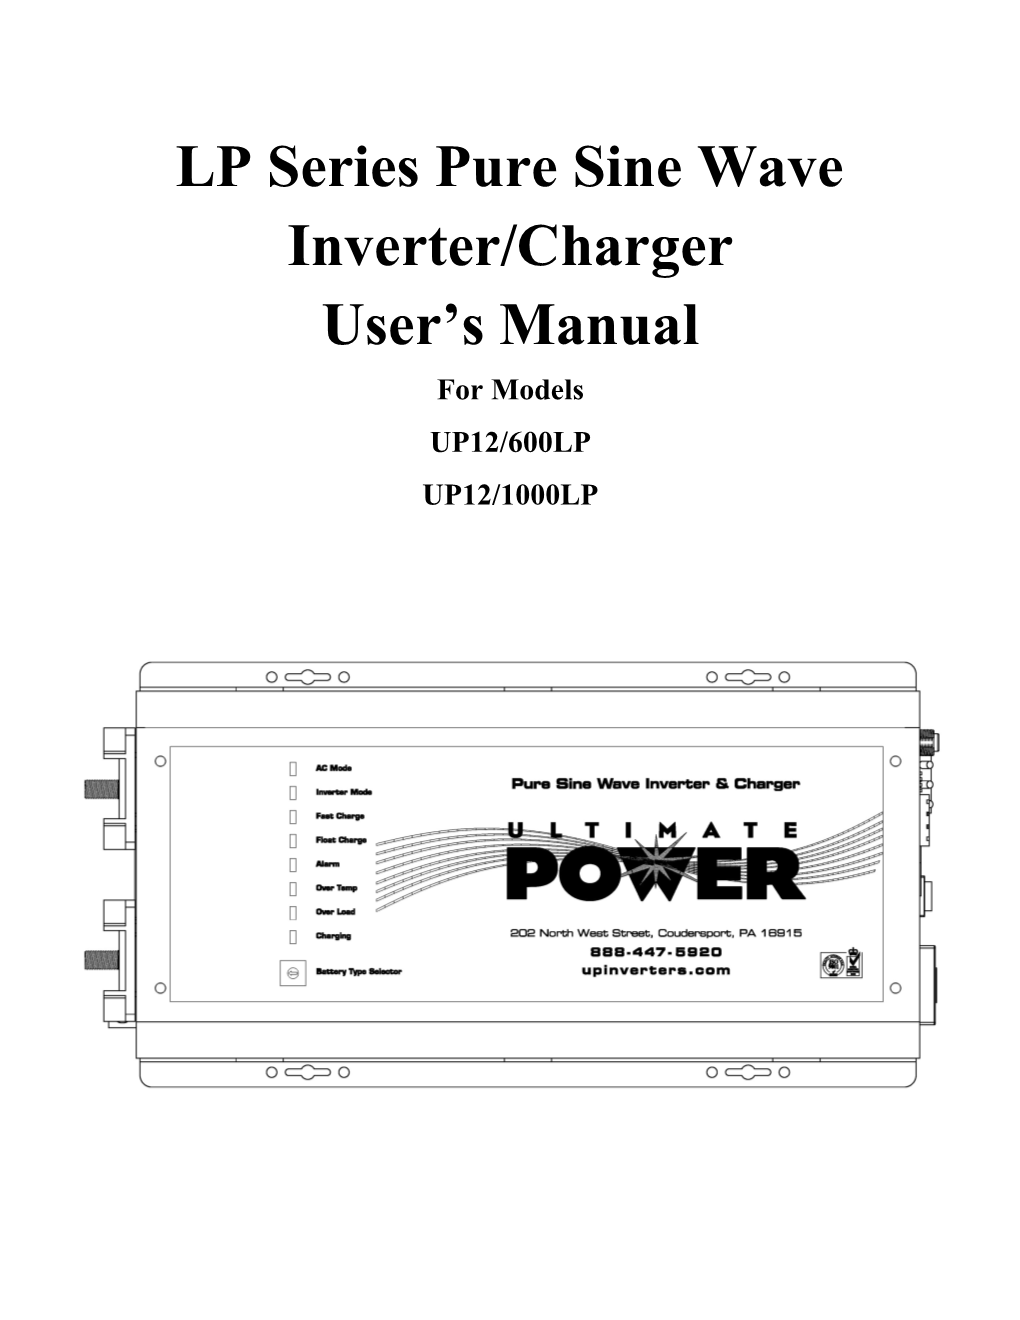 LP Series Pure Sine Wave Inverter/Charger User's Manual